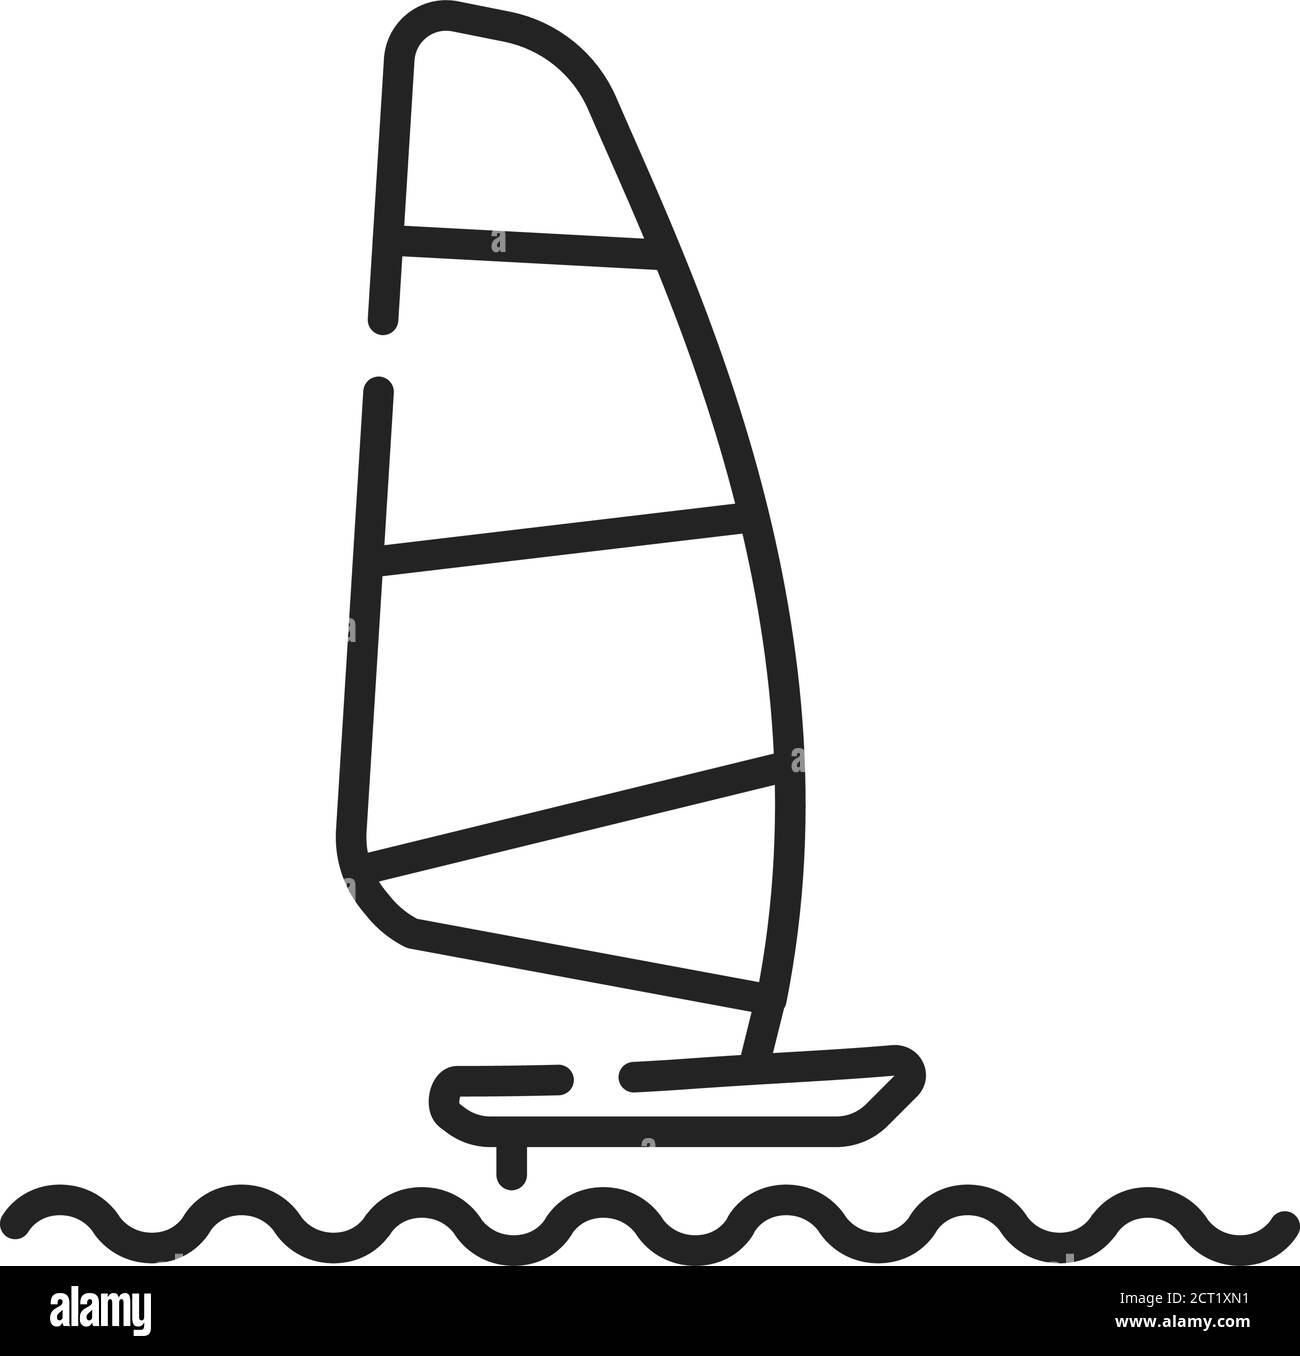 Windsurfing black line icon. Surface water sport. Combines elements of surfing and sailing. Pictogram for web page, mobile app, promo. UI UX GUI Stock Vector